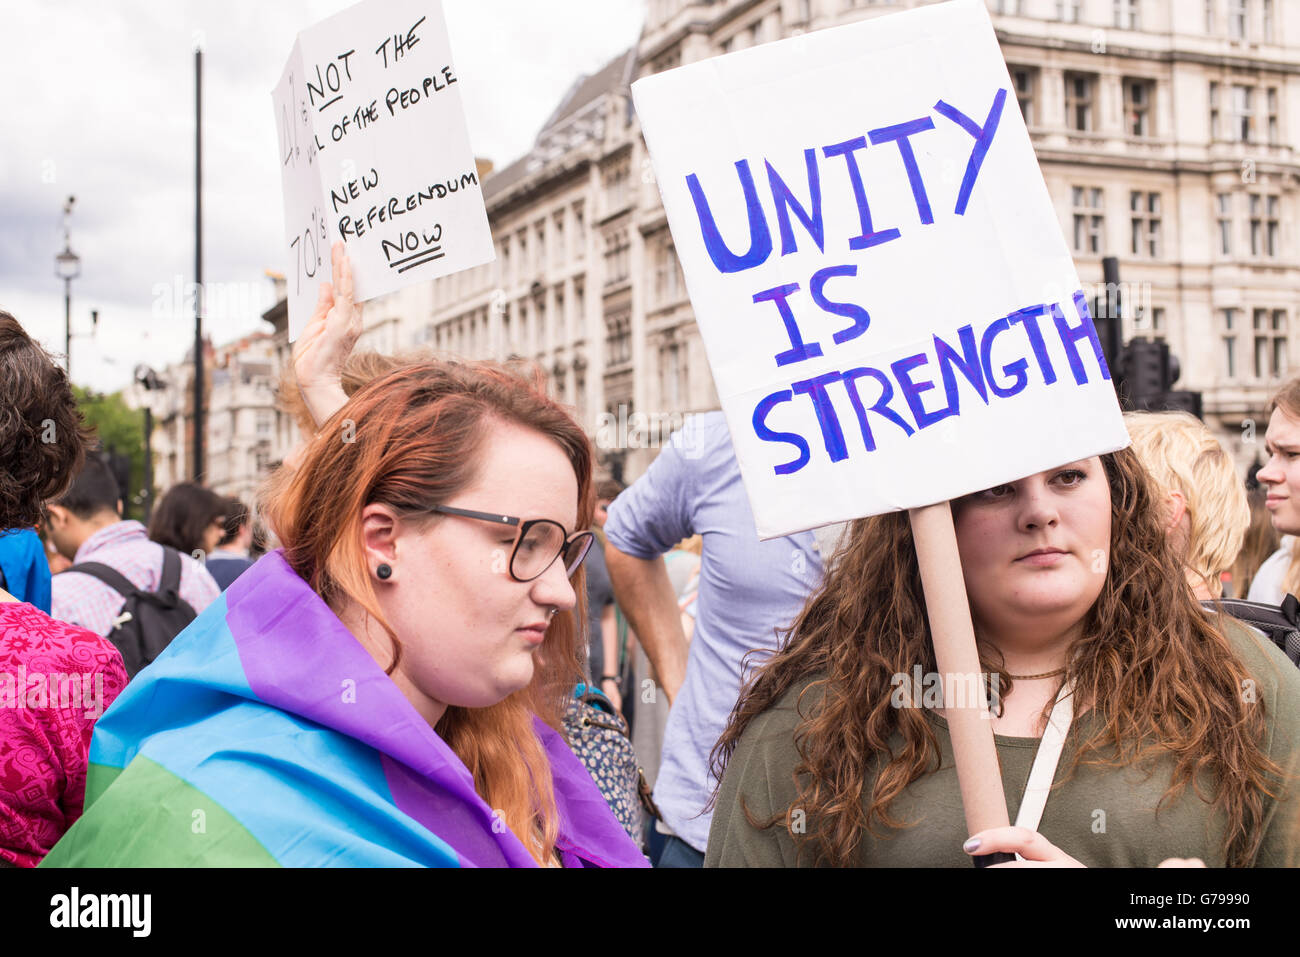 Westminster, London, UK. 25th June, 2016. Young female pro-remain protesters carrying poster saying 'Unity is strength' as part of protests against Brexit in front of the House of Parliament in London, UK. Nicola Ferrari /Alamy Live News Stock Photo